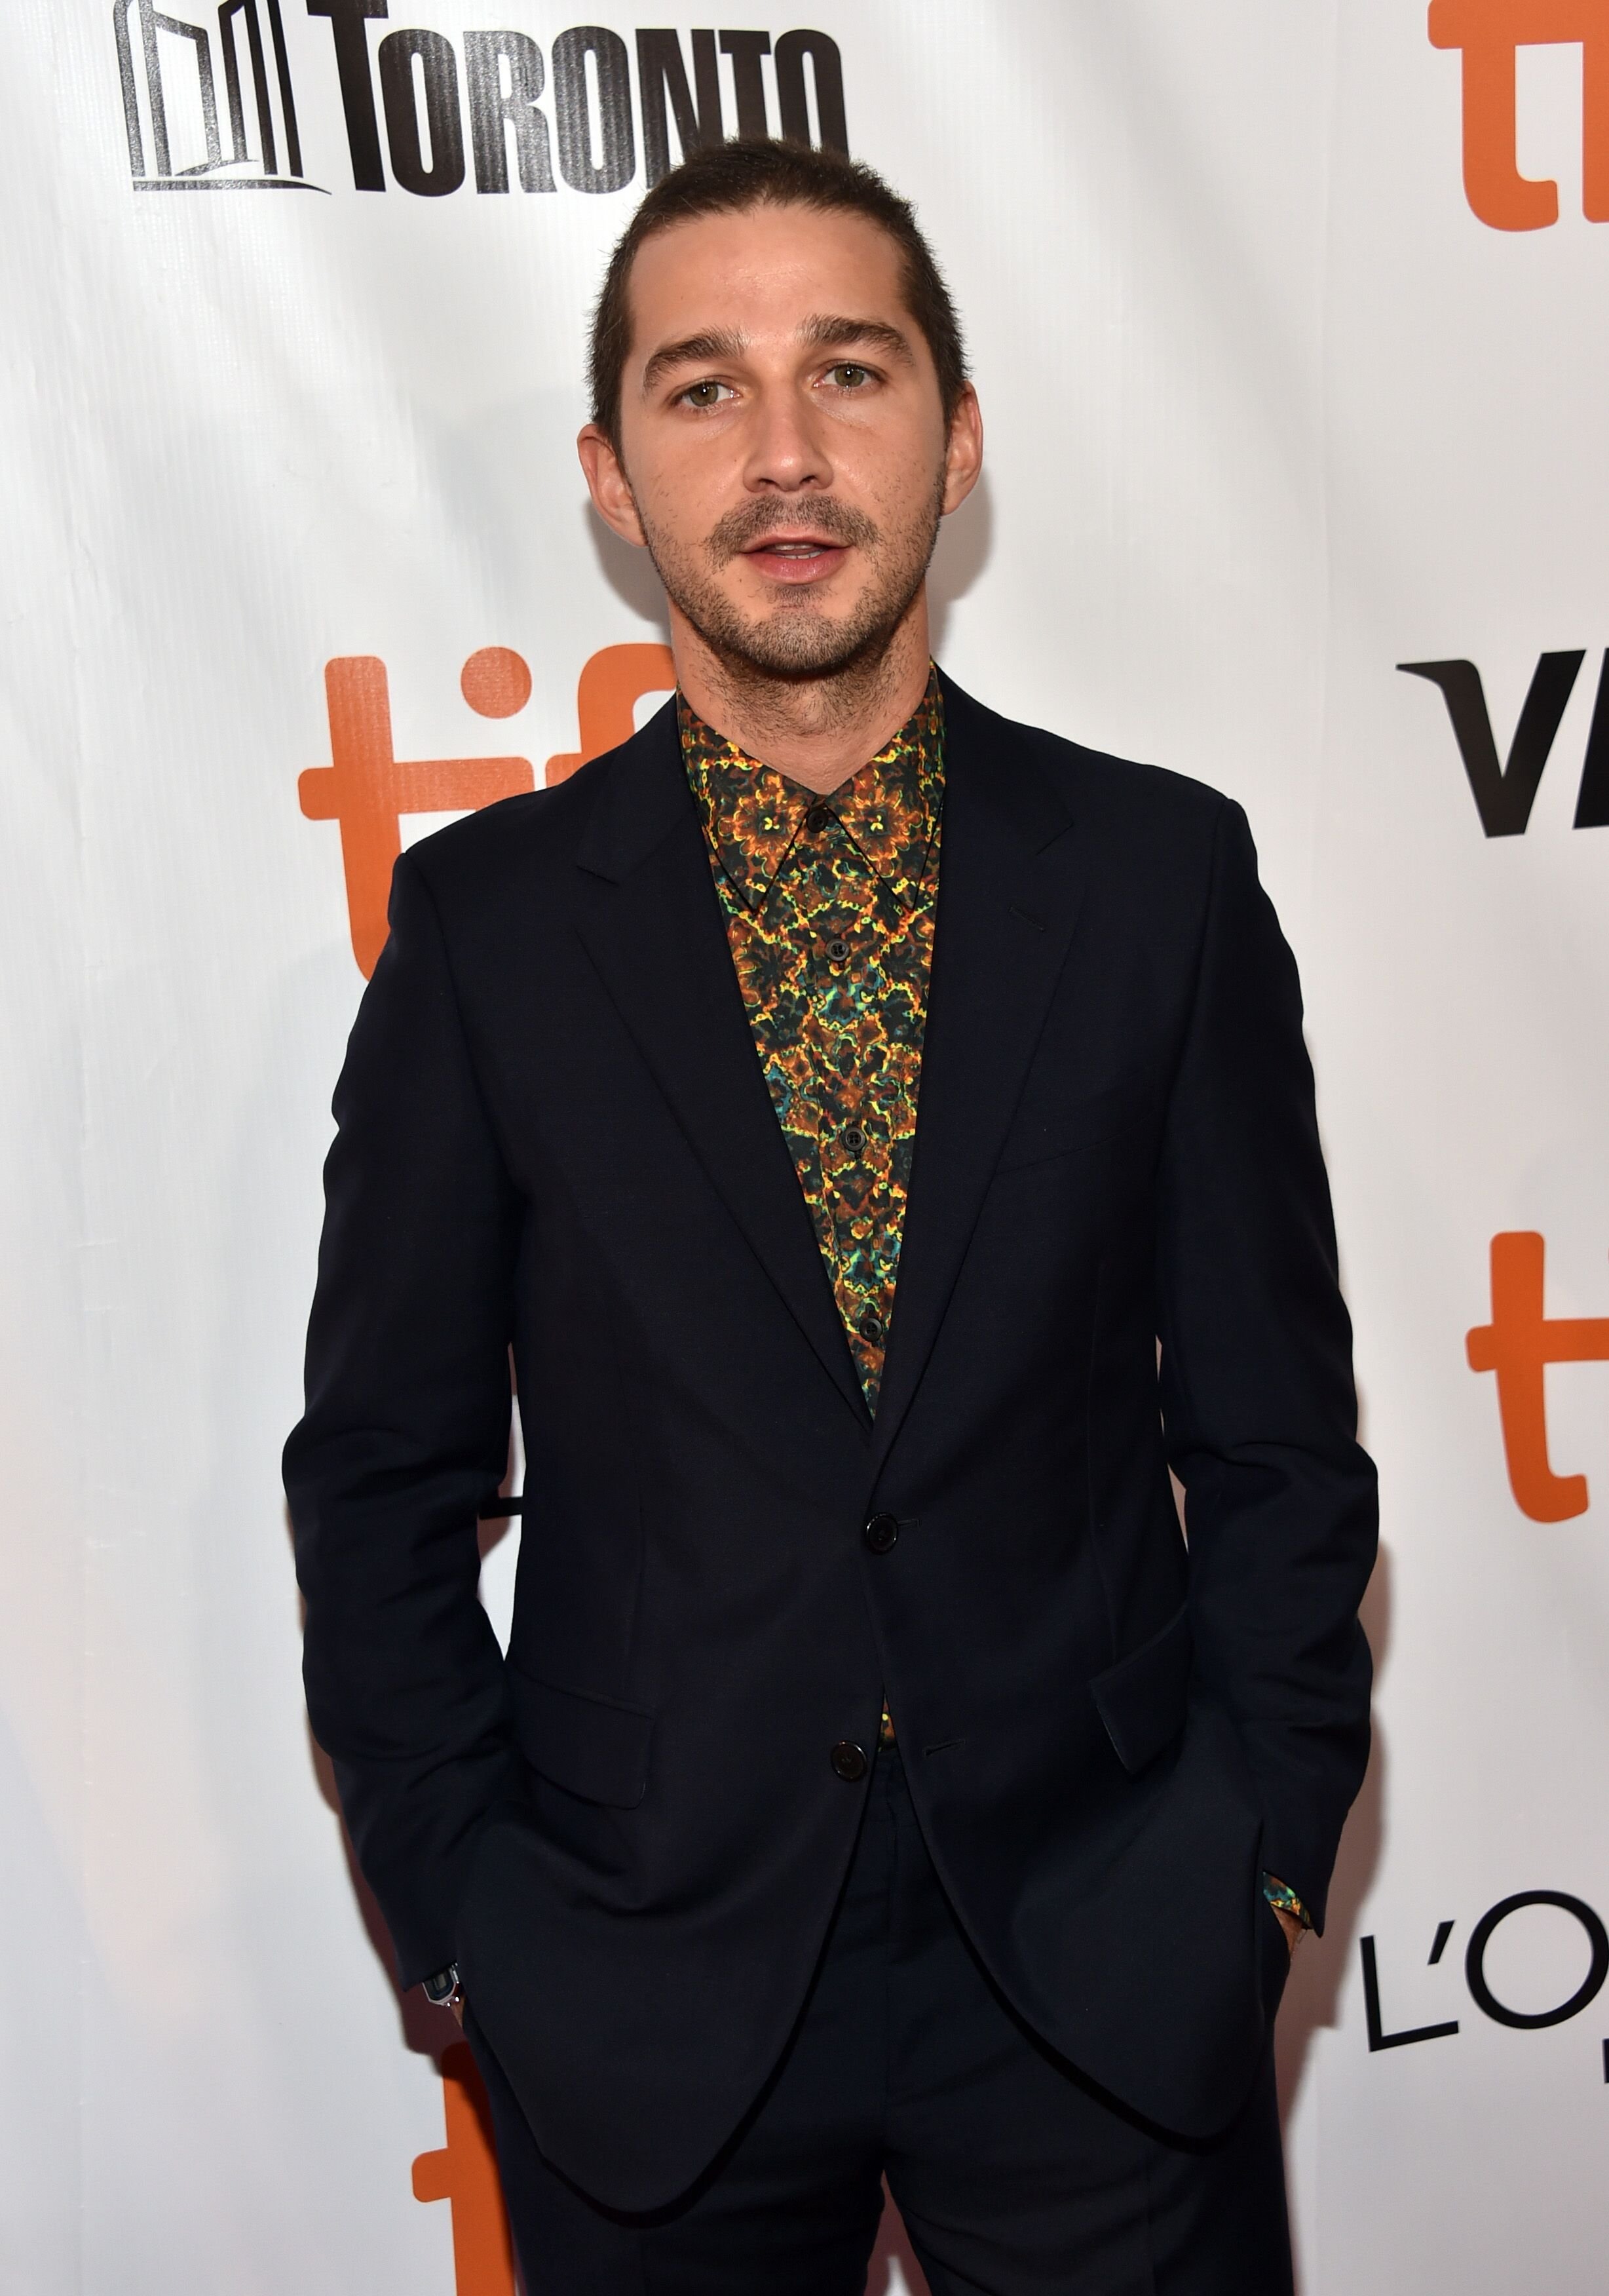 Shia LaBeouf attends the 'Borg/McEnroe' premiere. | Source: Getty Images